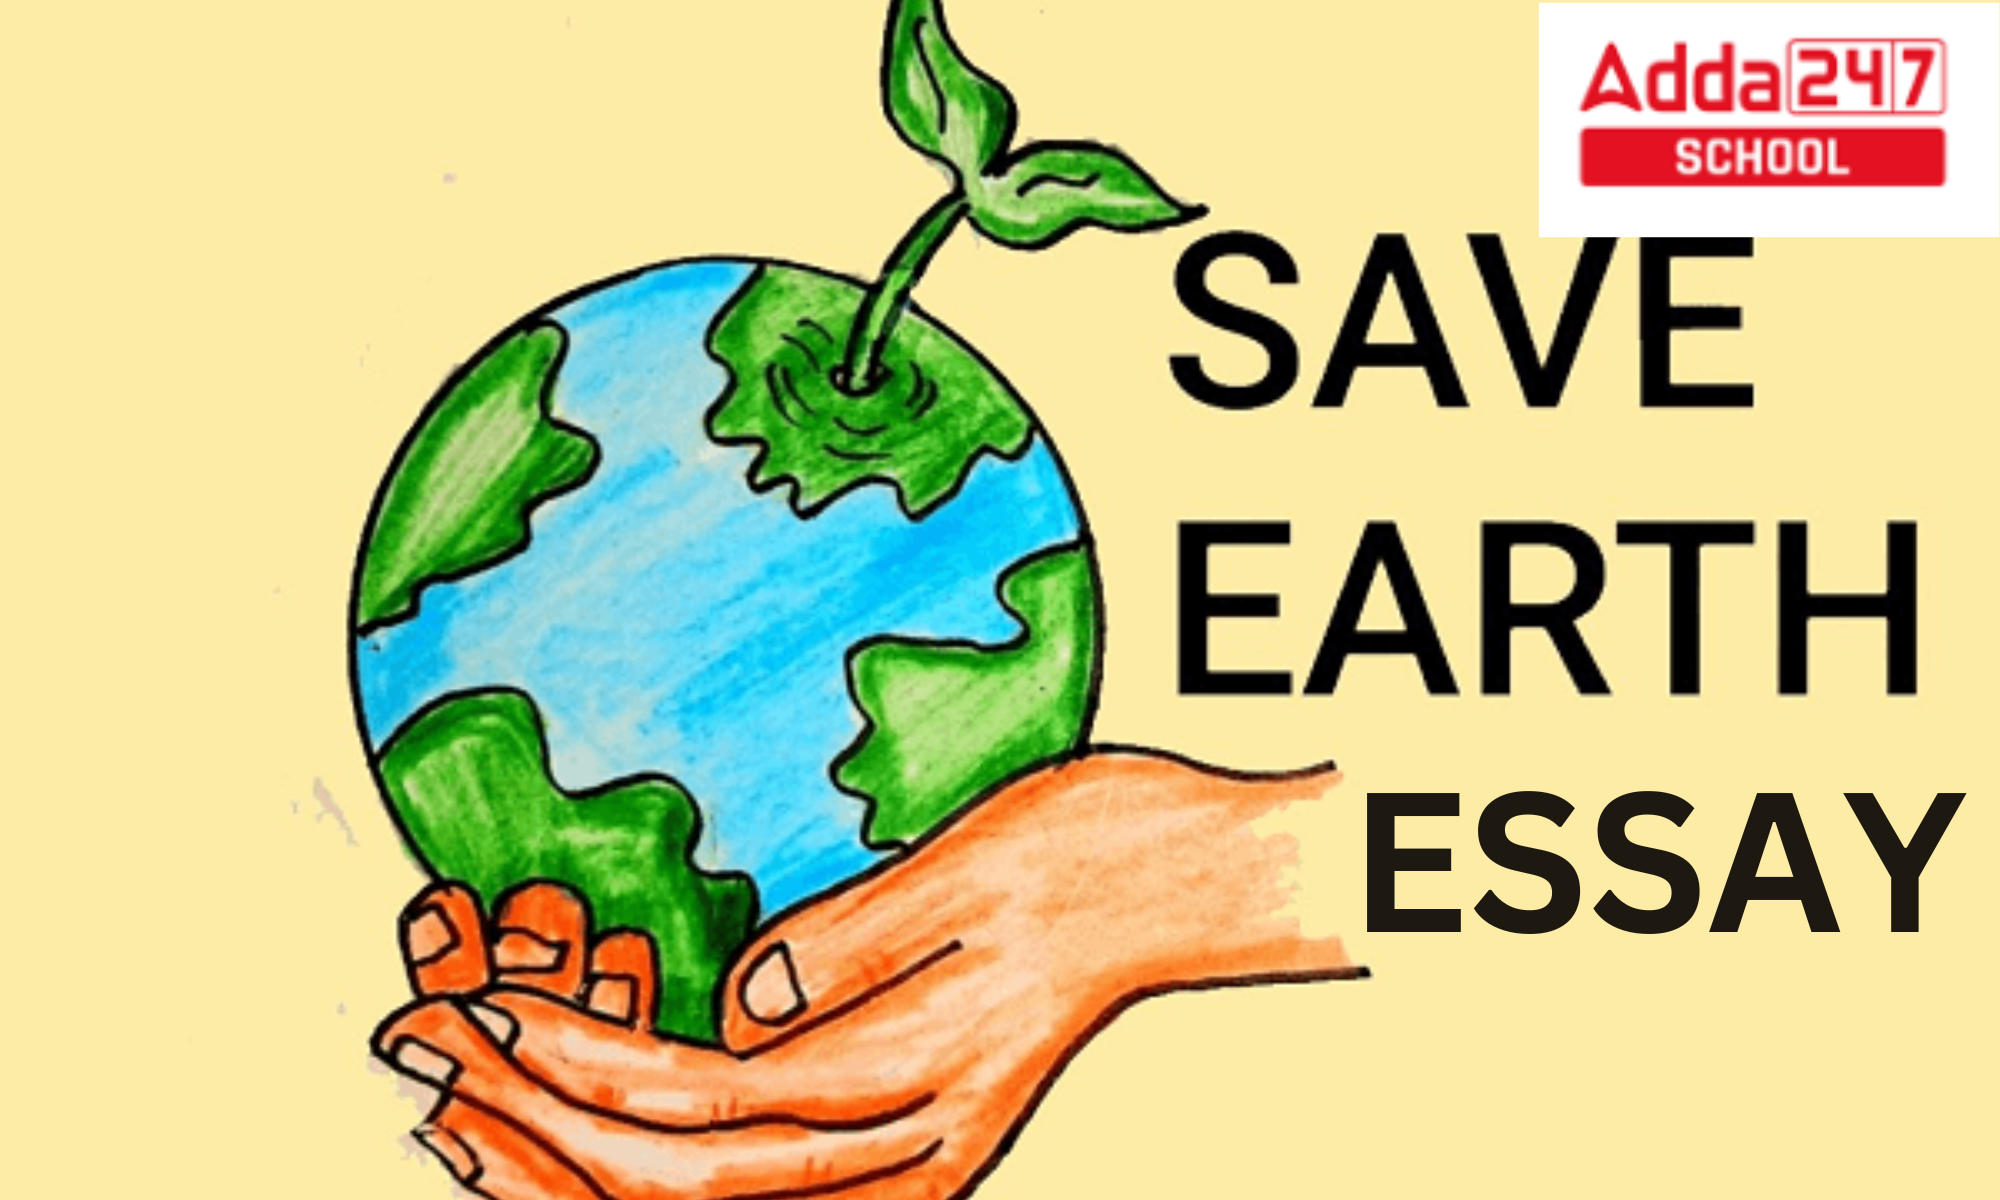 Save Earth Essay in 100-200 Words, Check Save Earth Poster_20.1